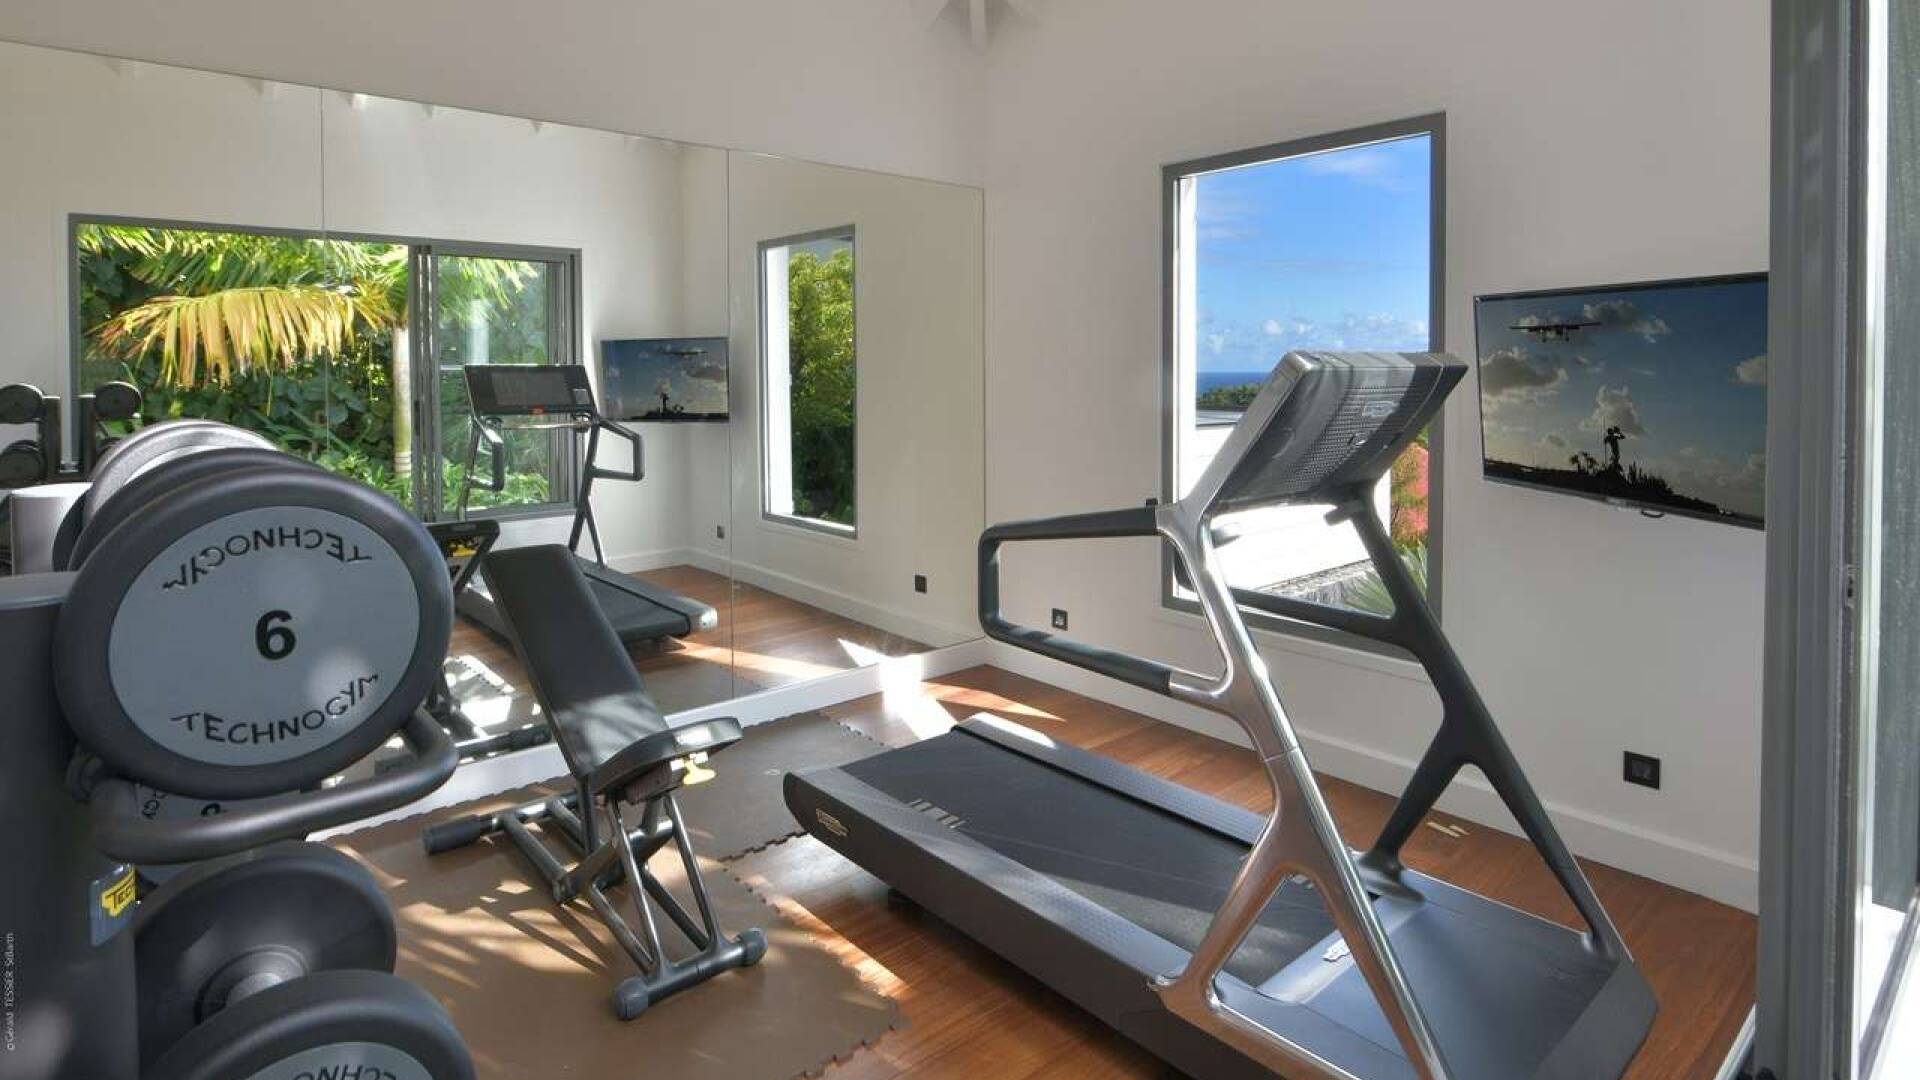 Gym at WV RMN, Flamands, St. Barthelemy